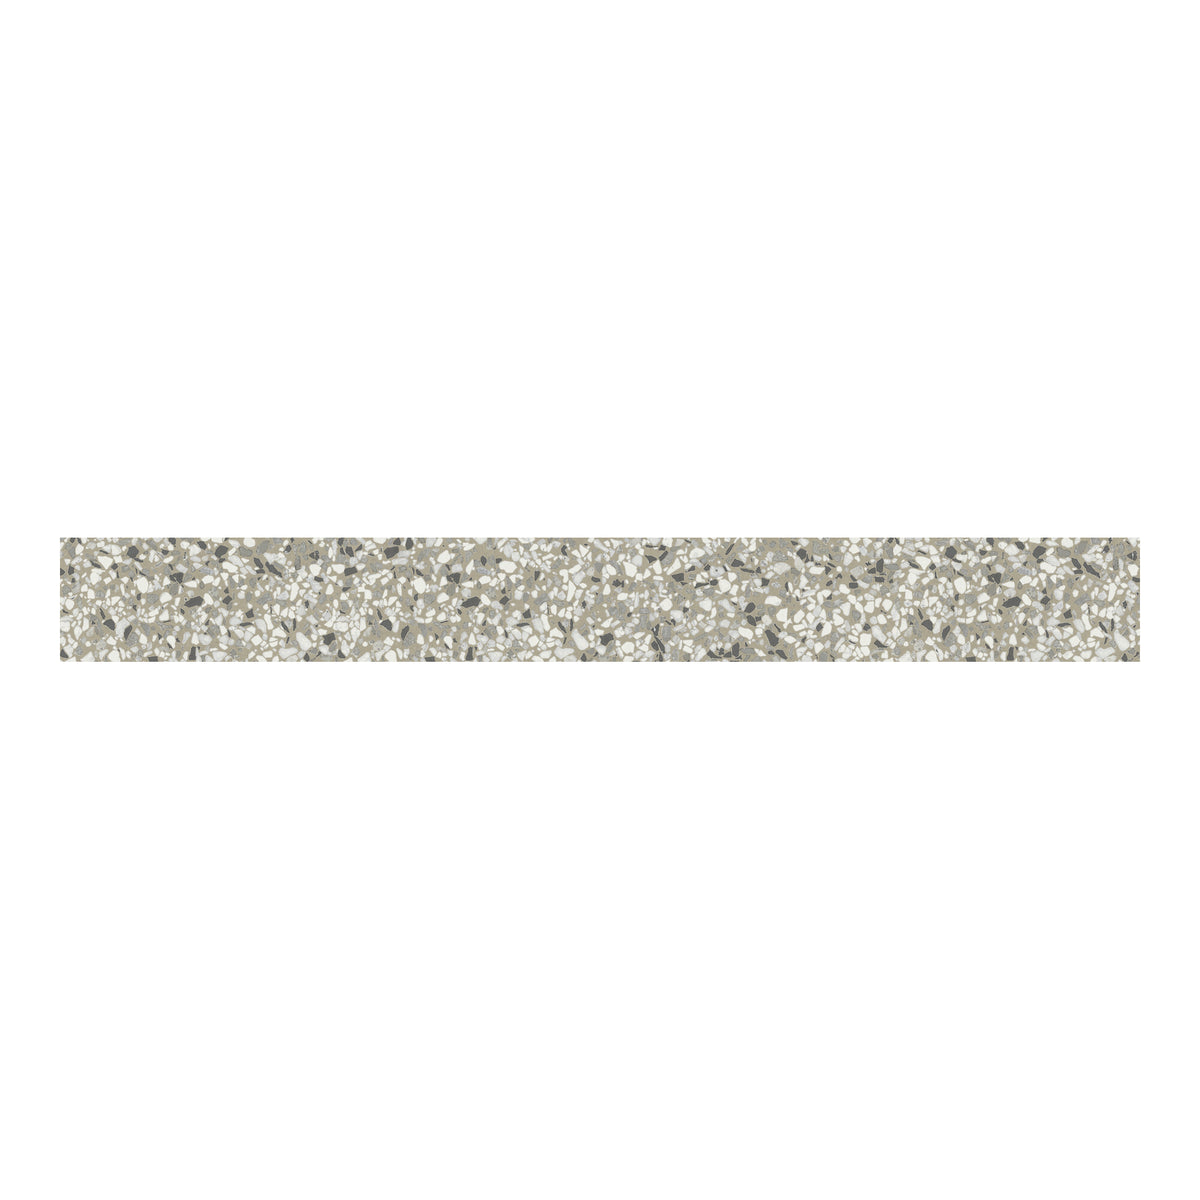 Daltile - Modernist 3 in. x 24 in. Colorbody Porcelain Bullnose - Soriano Clay